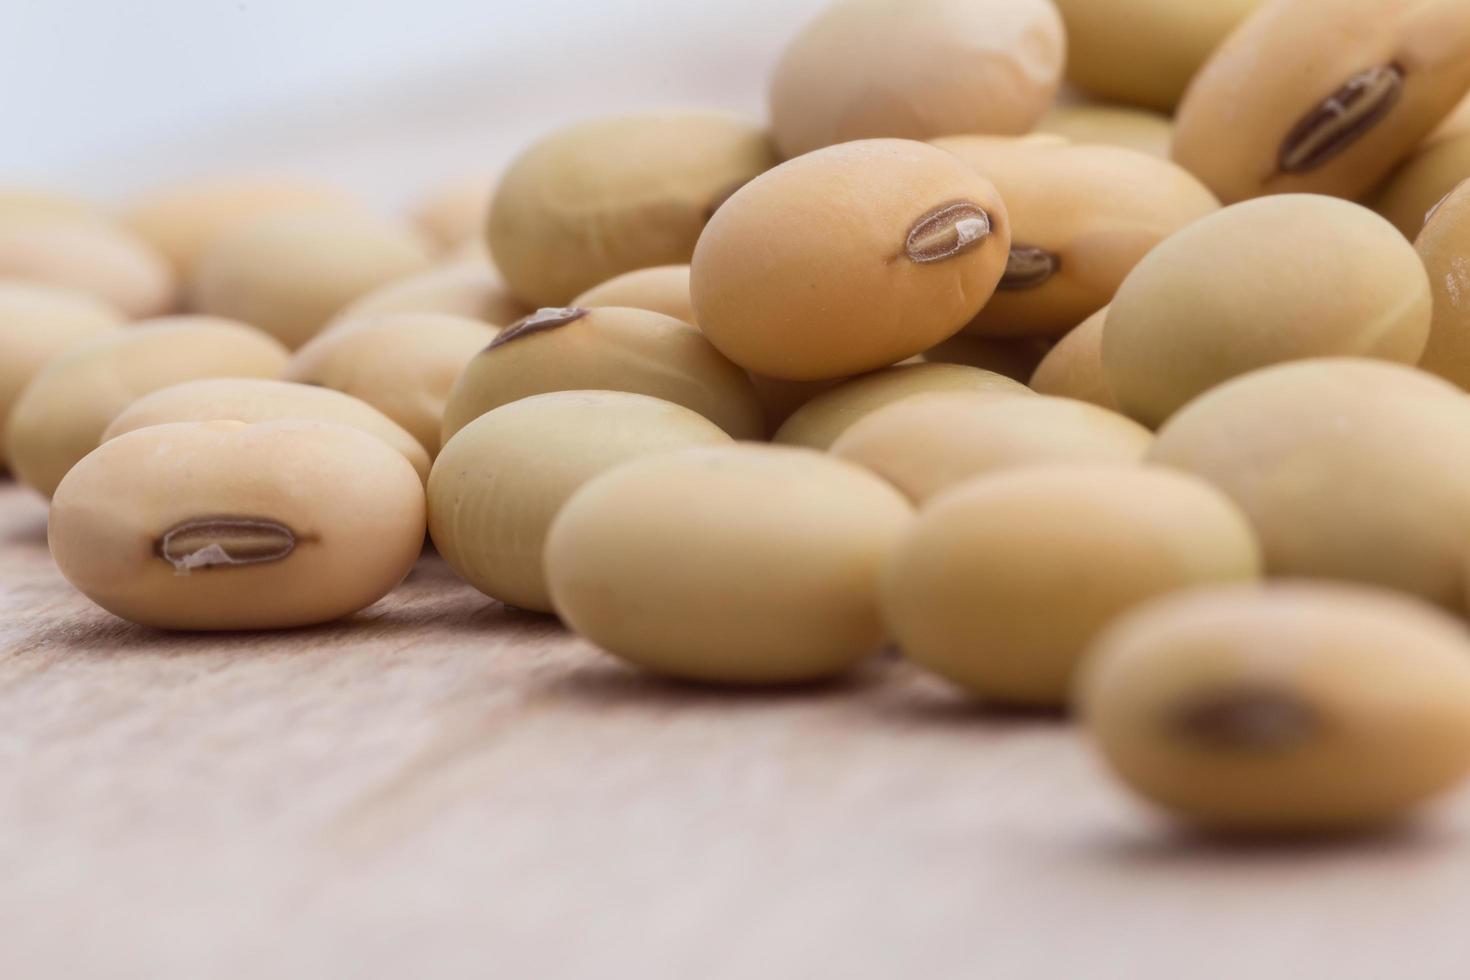 Soy beans on wood background photo